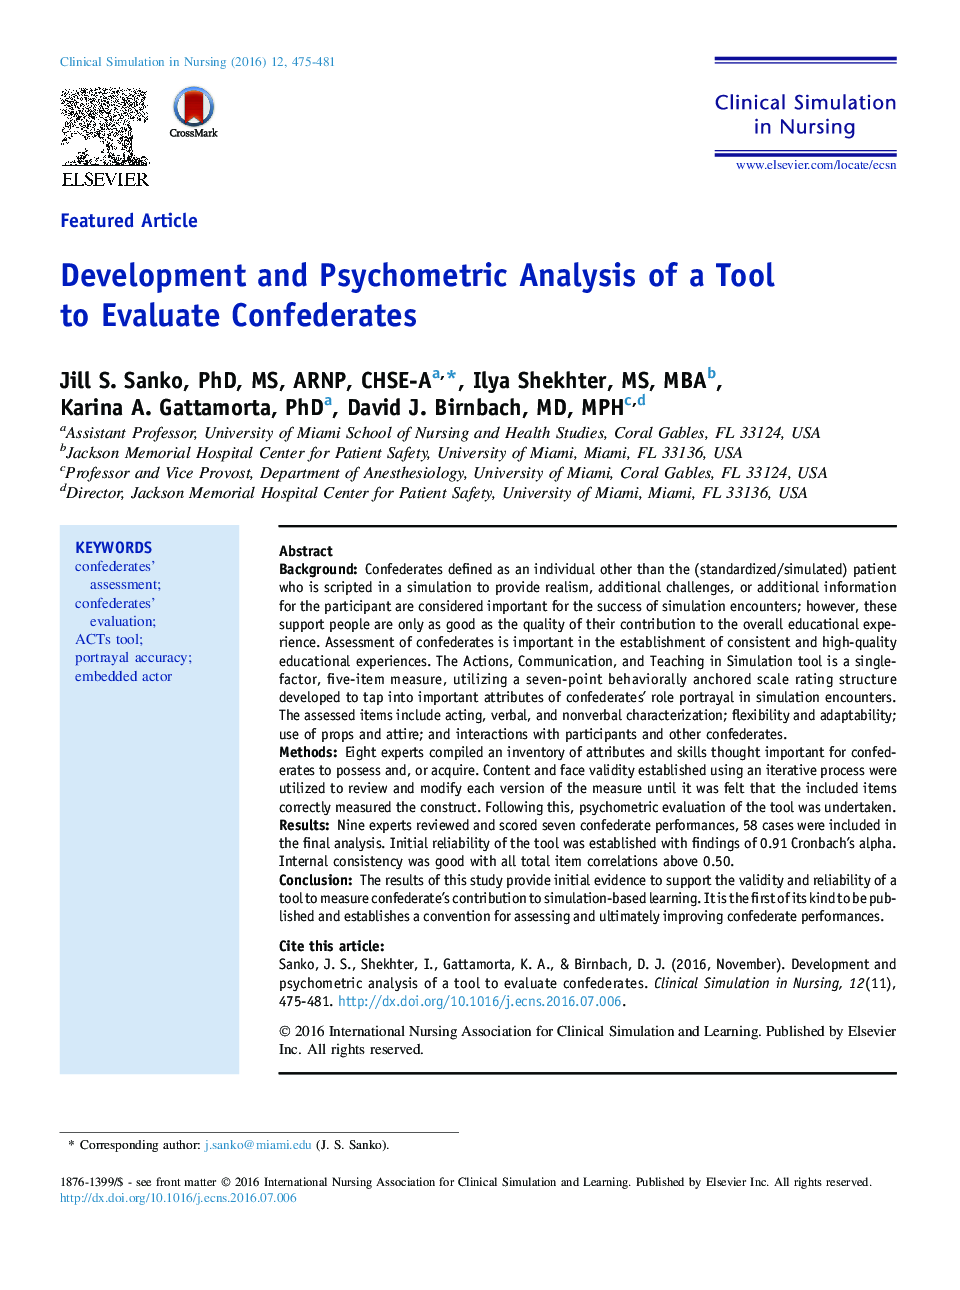 Development and Psychometric Analysis of a Tool to Evaluate Confederates